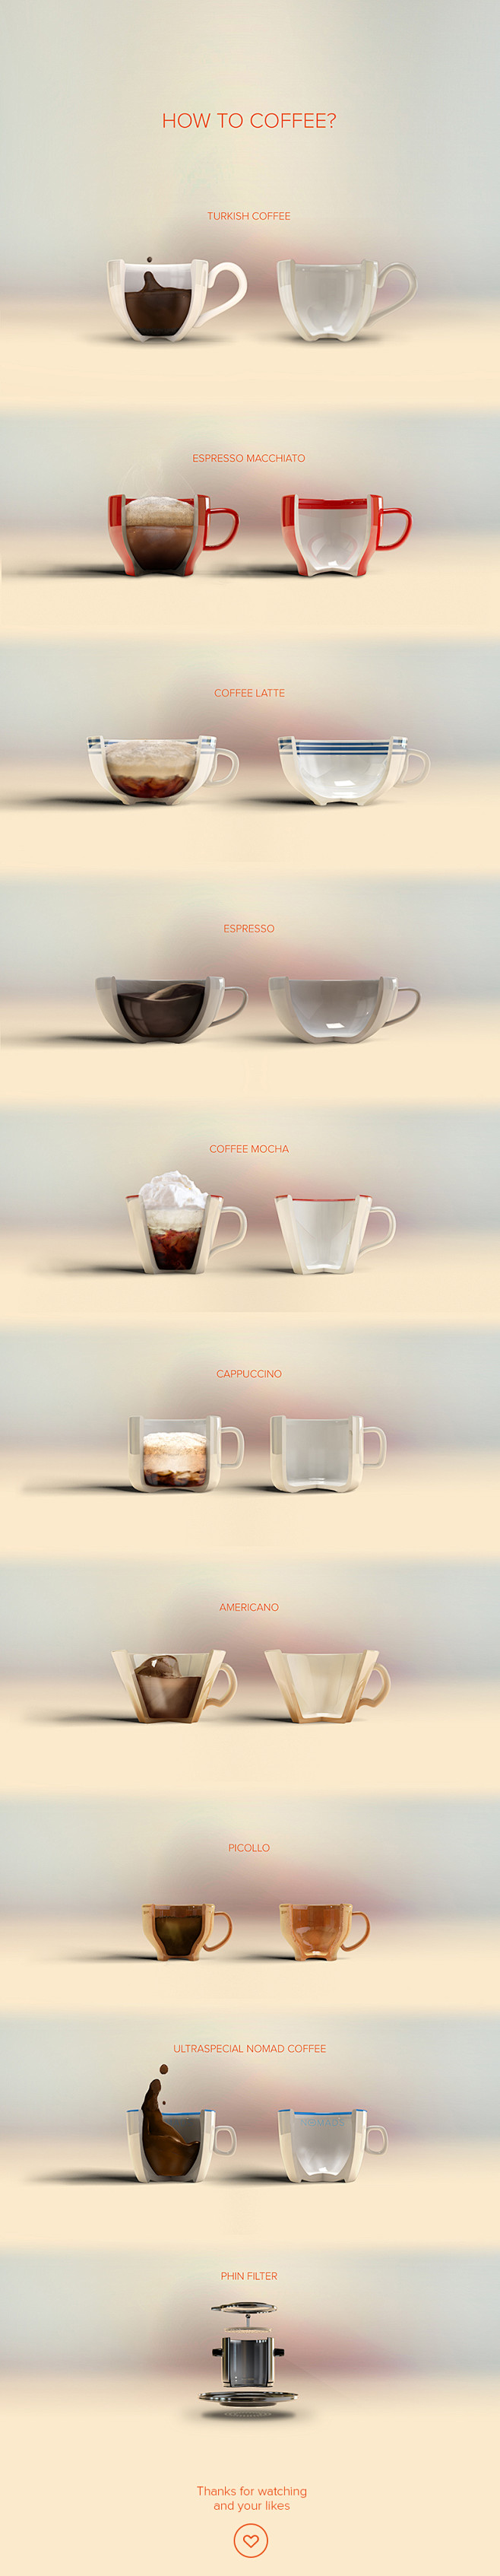 How to Coffee : I st...